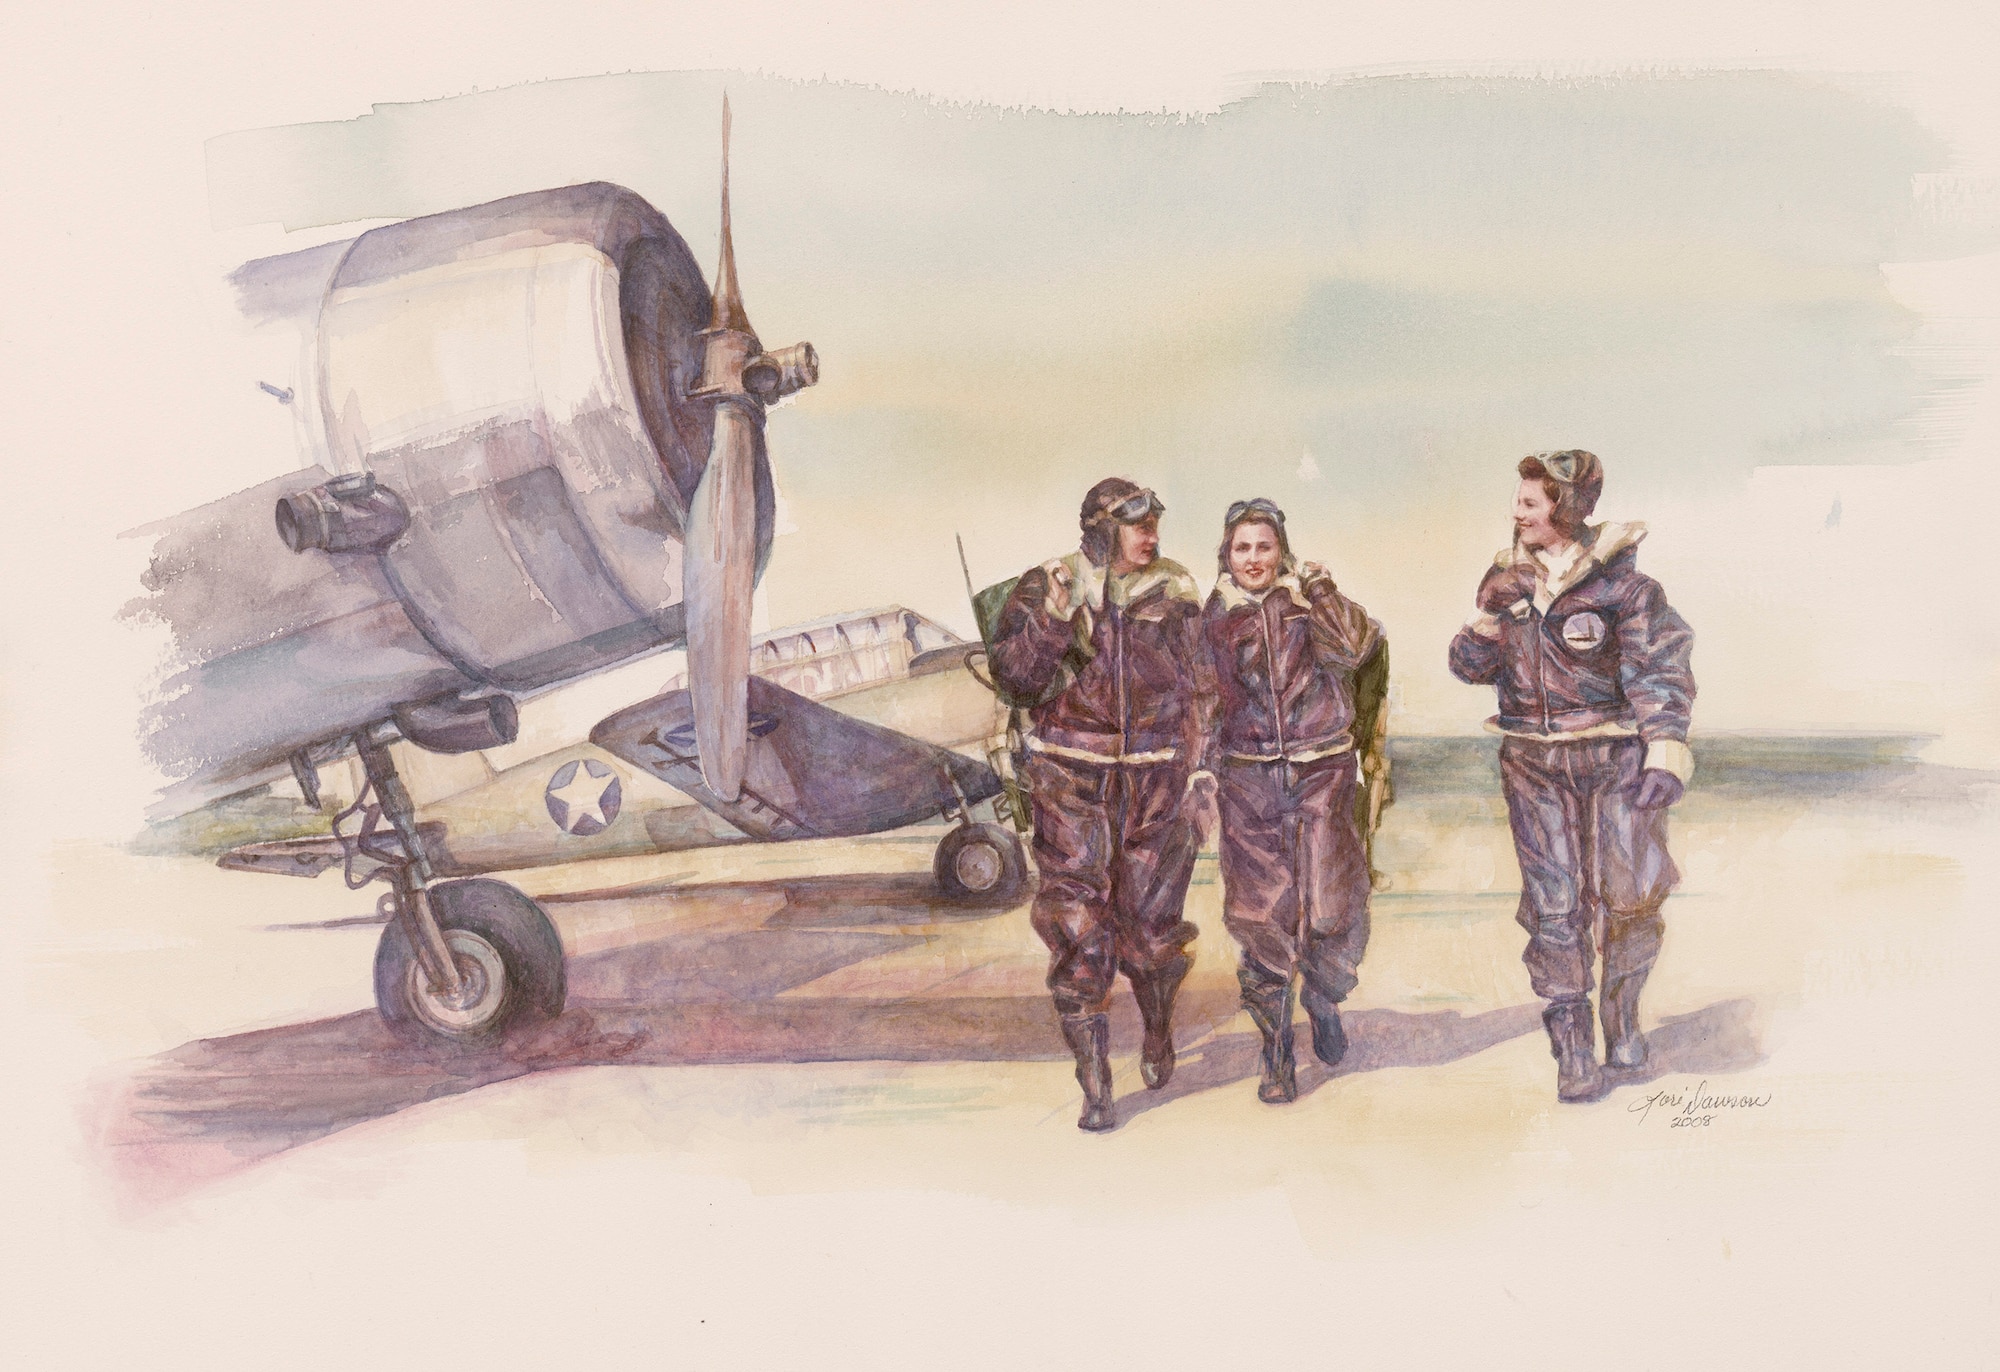 "Three Pretty Fly Girls," a watercolor painting by artist Lori Dawson, is one of more than 200 paintings being introduced into the Air Force Art Program. The new artwork will be displayed Oct. 21 through 24 at the Officers' Club at Bolling Air Force Base, D.C. There are more than 9,400 paintings in the Air Force Art Program collection. (U.S. Air Force illustration) 
